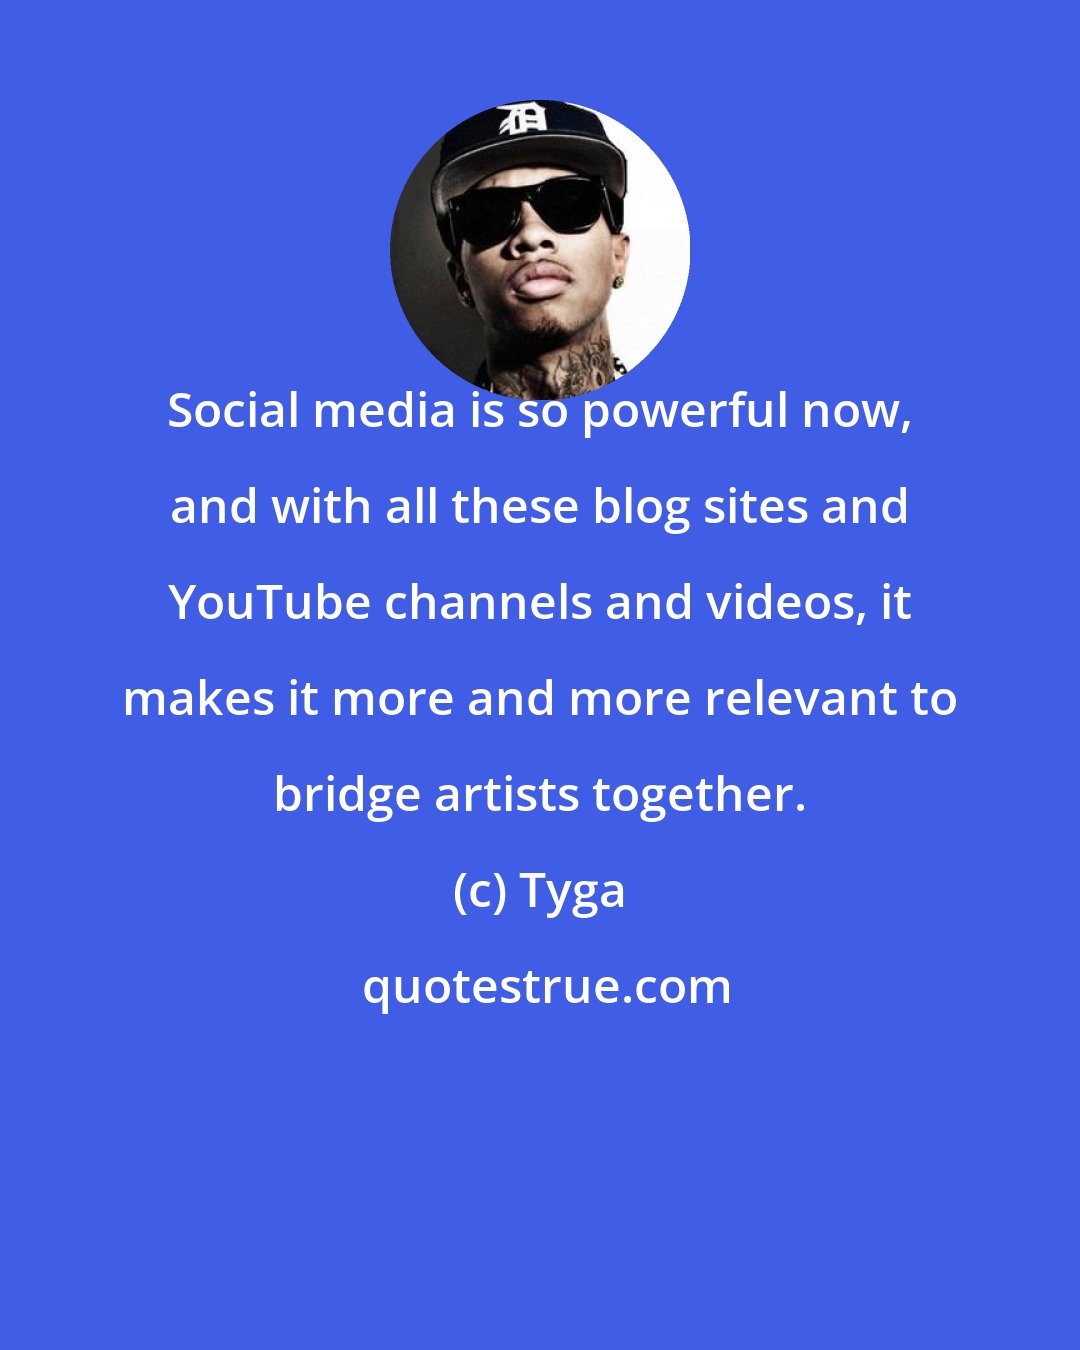 Tyga: Social media is so powerful now, and with all these blog sites and YouTube channels and videos, it makes it more and more relevant to bridge artists together.